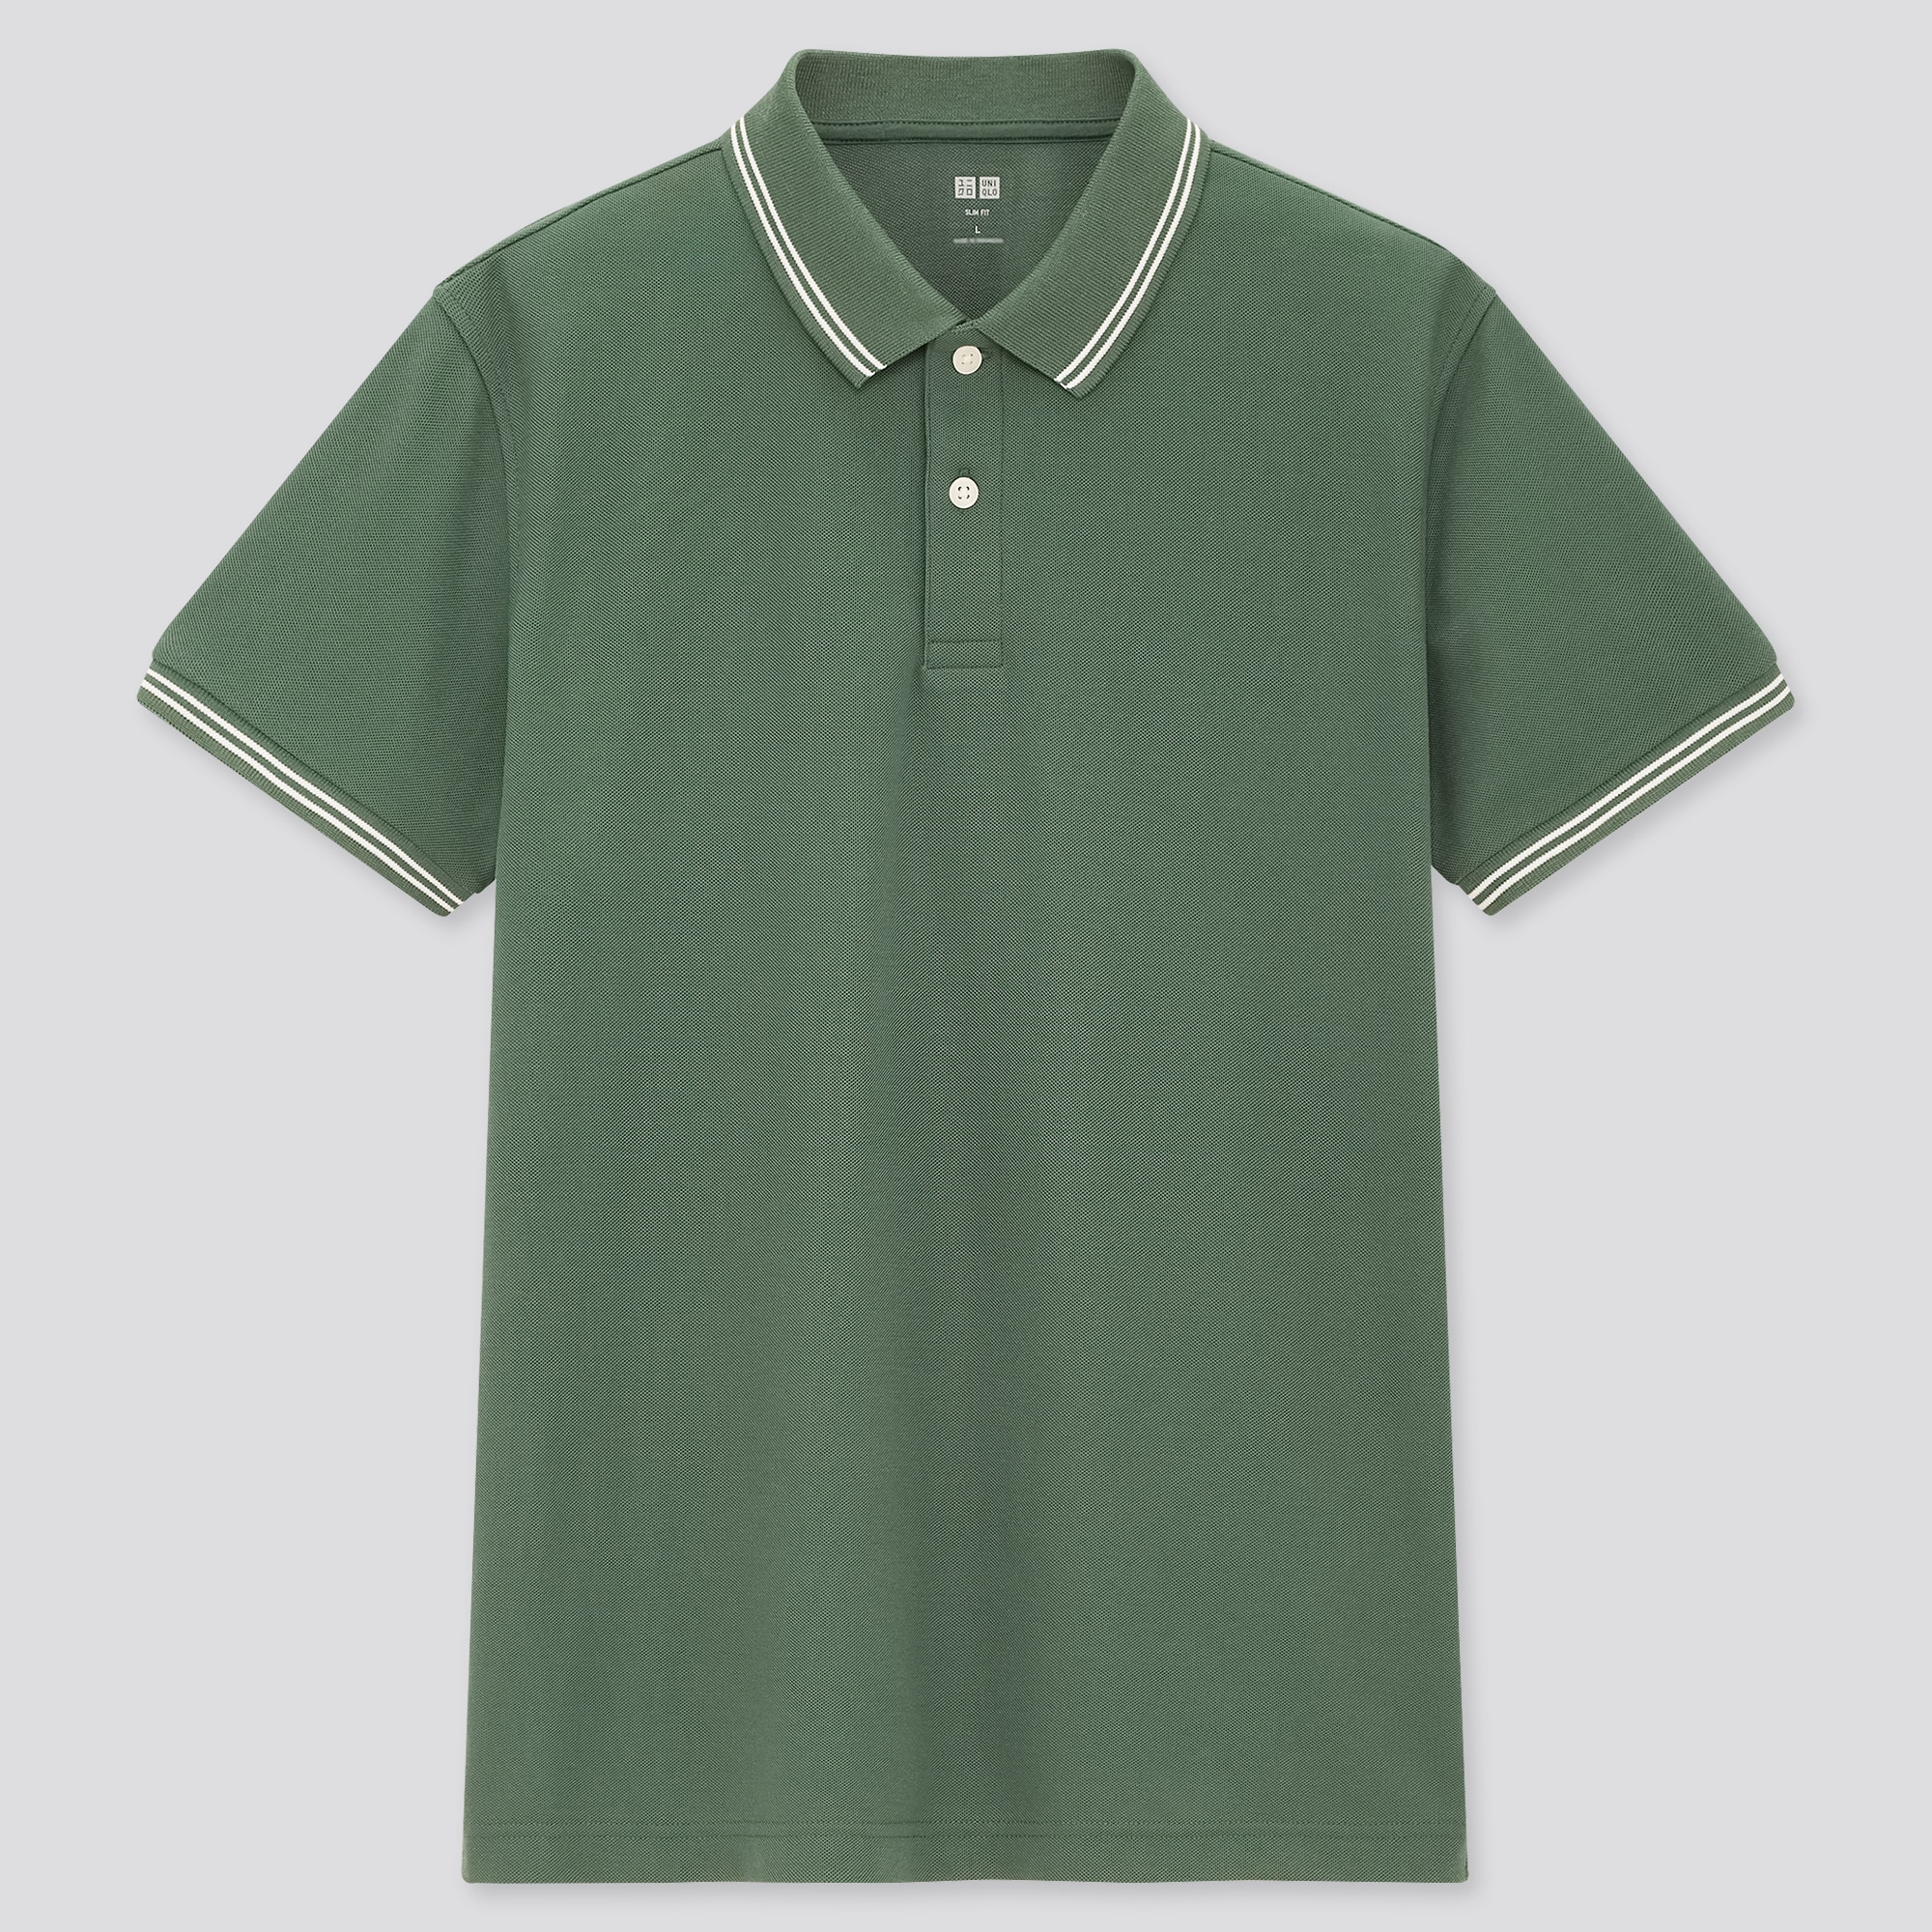 Cool Uniqlo Rugger Polo Shirt New Designs and Price